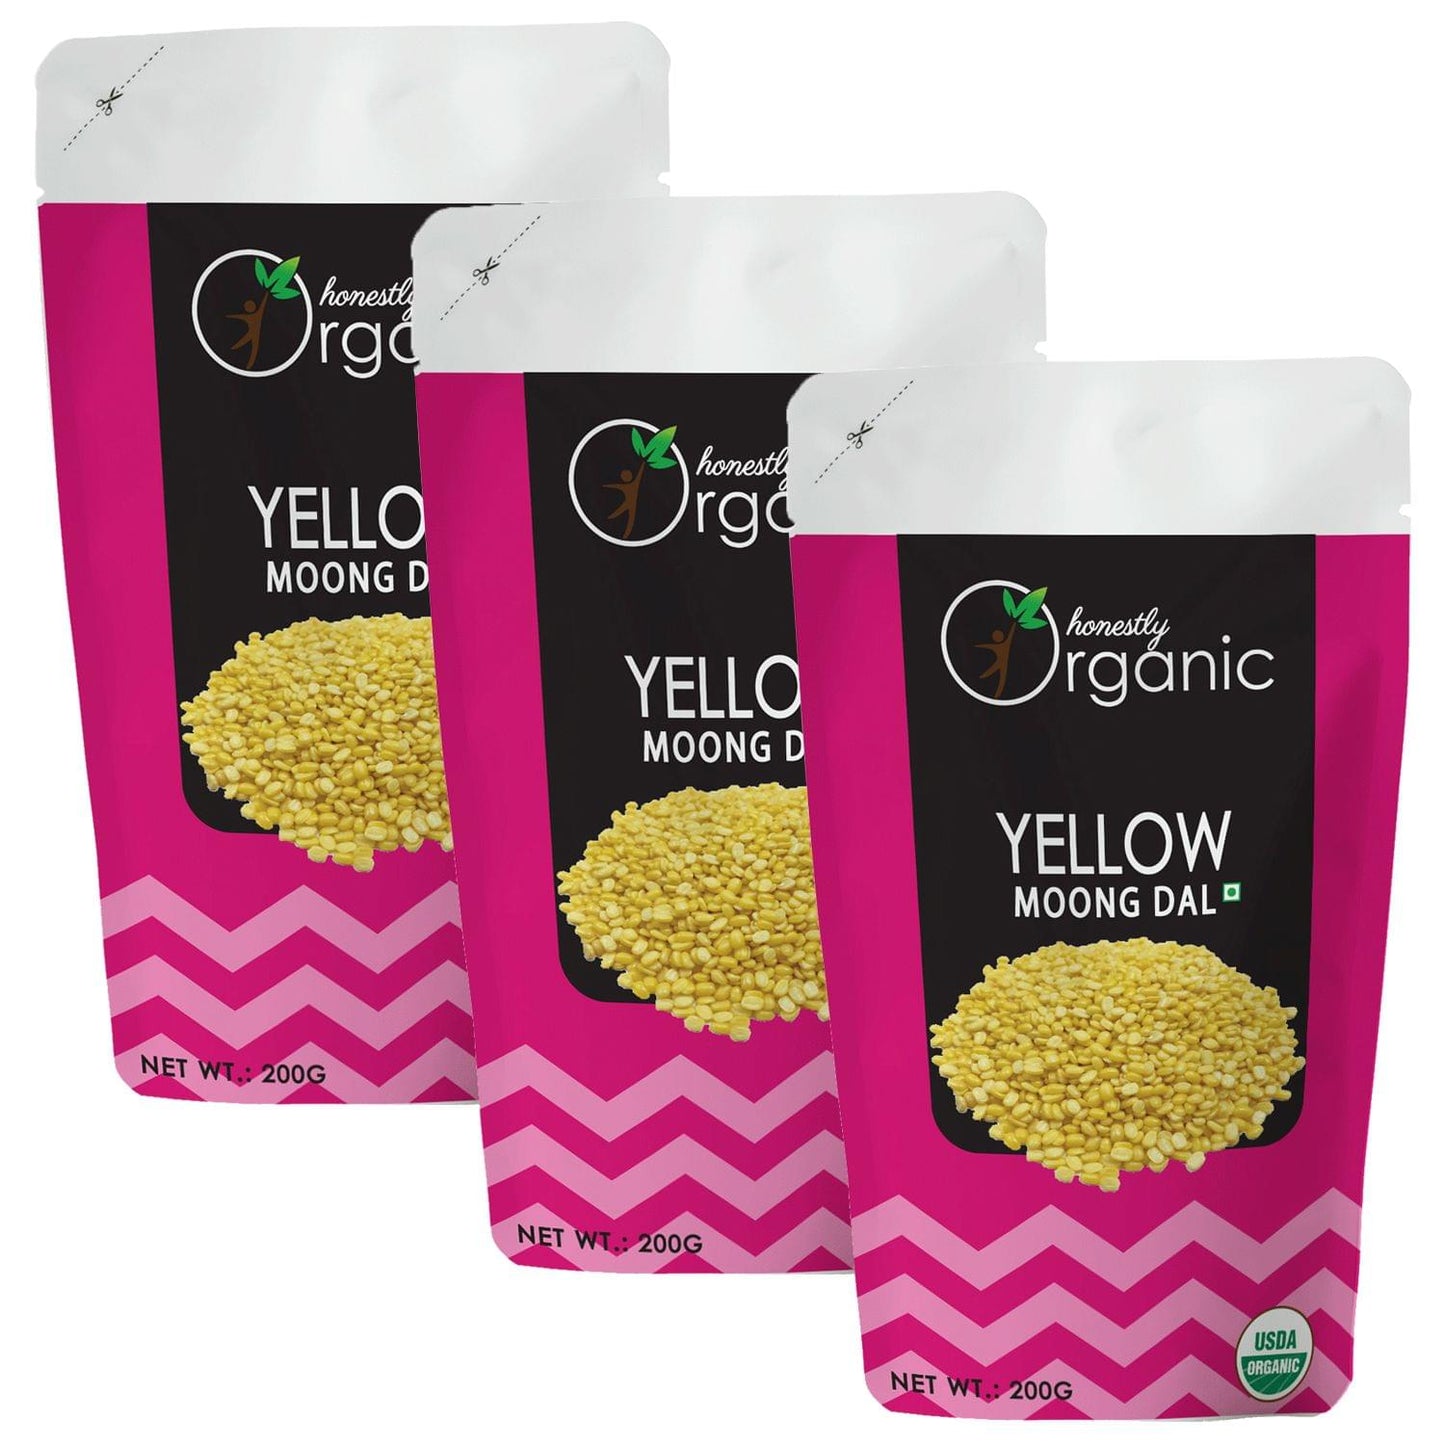 D-Alive Honestly Organic Yellow Moong Dal - 200g (Pack of 3)